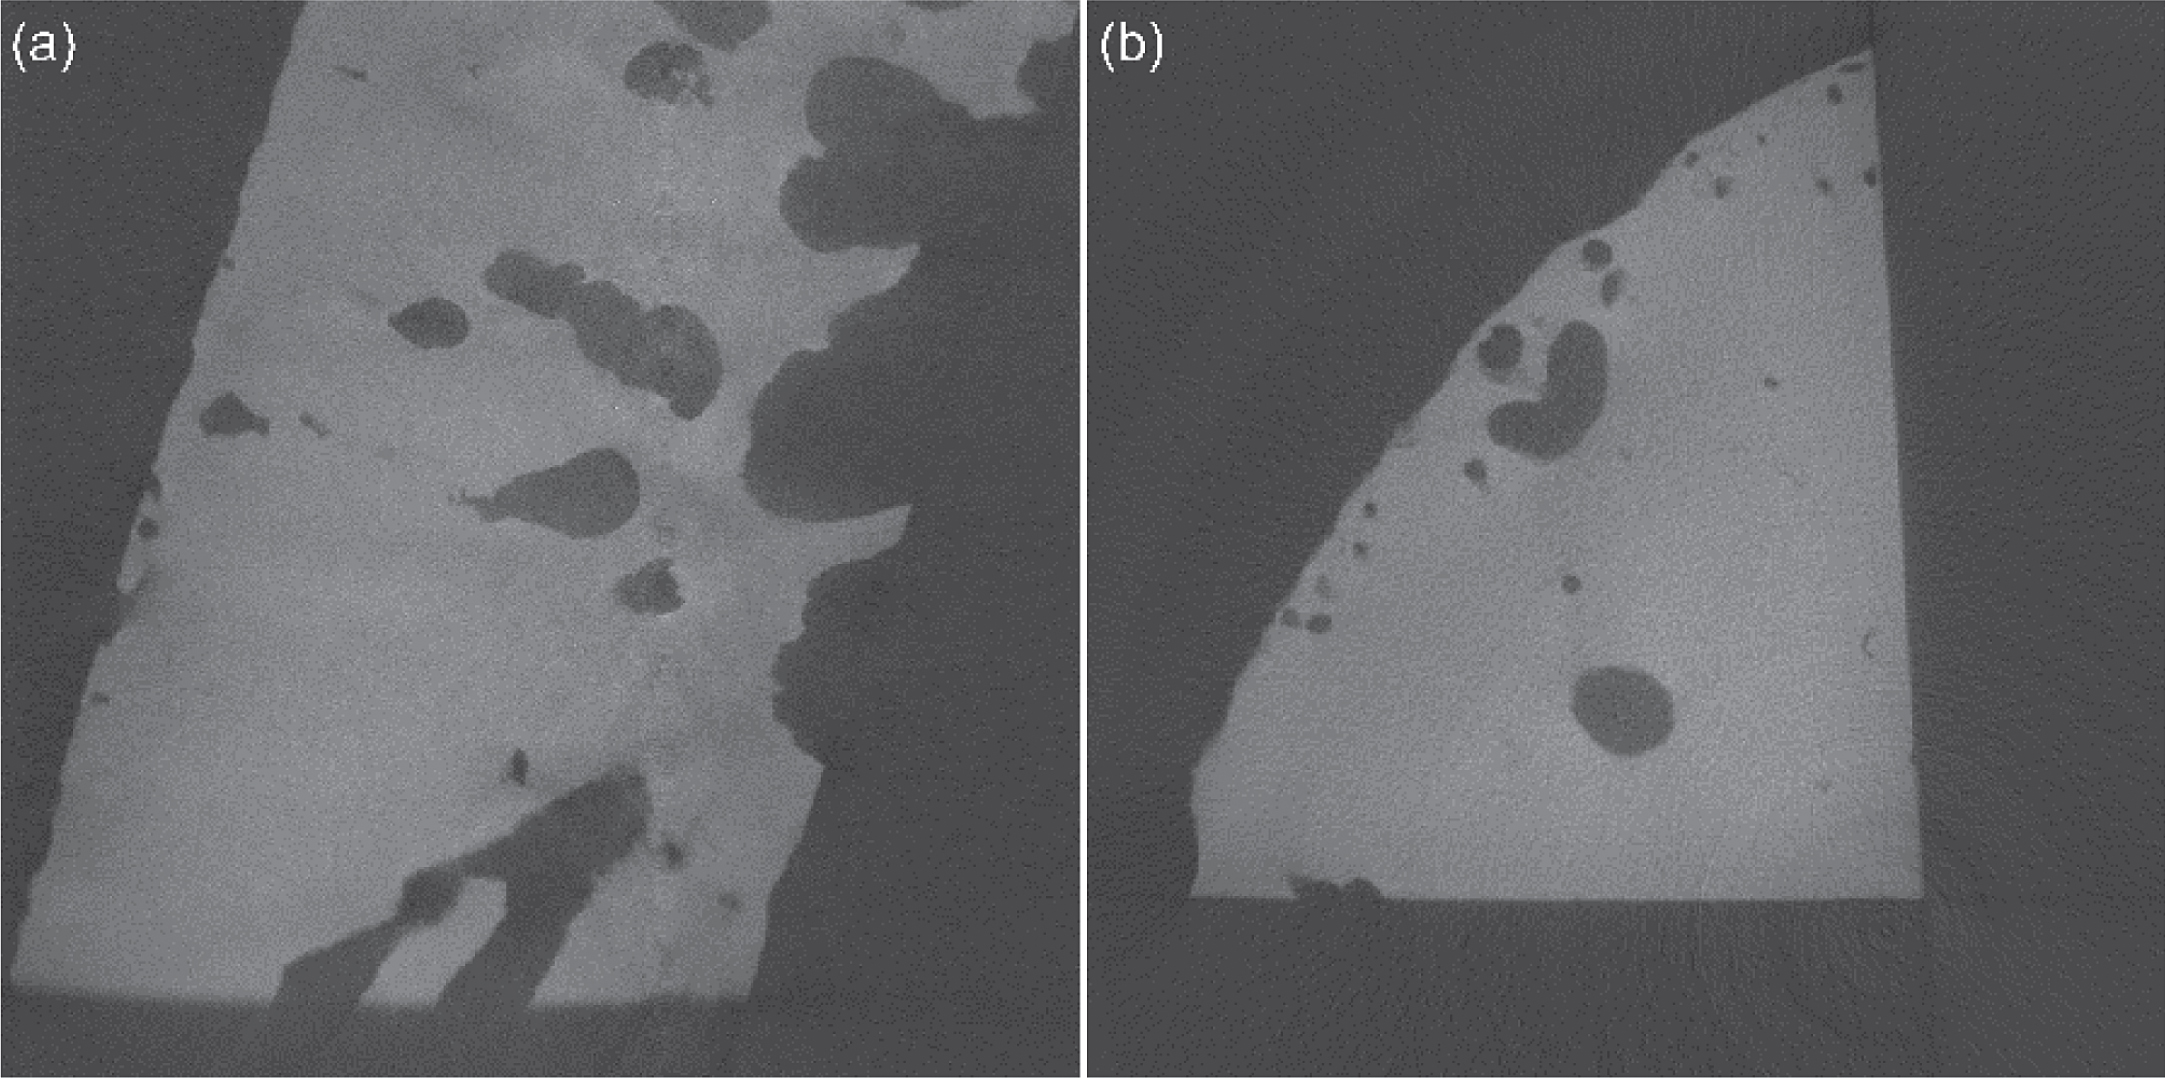 CT images (a) of the same orientation, and (b) orthogonal to image in Fig. 3(a). Note that (b) is smaller and has less material than (a) and has been cropped and resized for visualization.